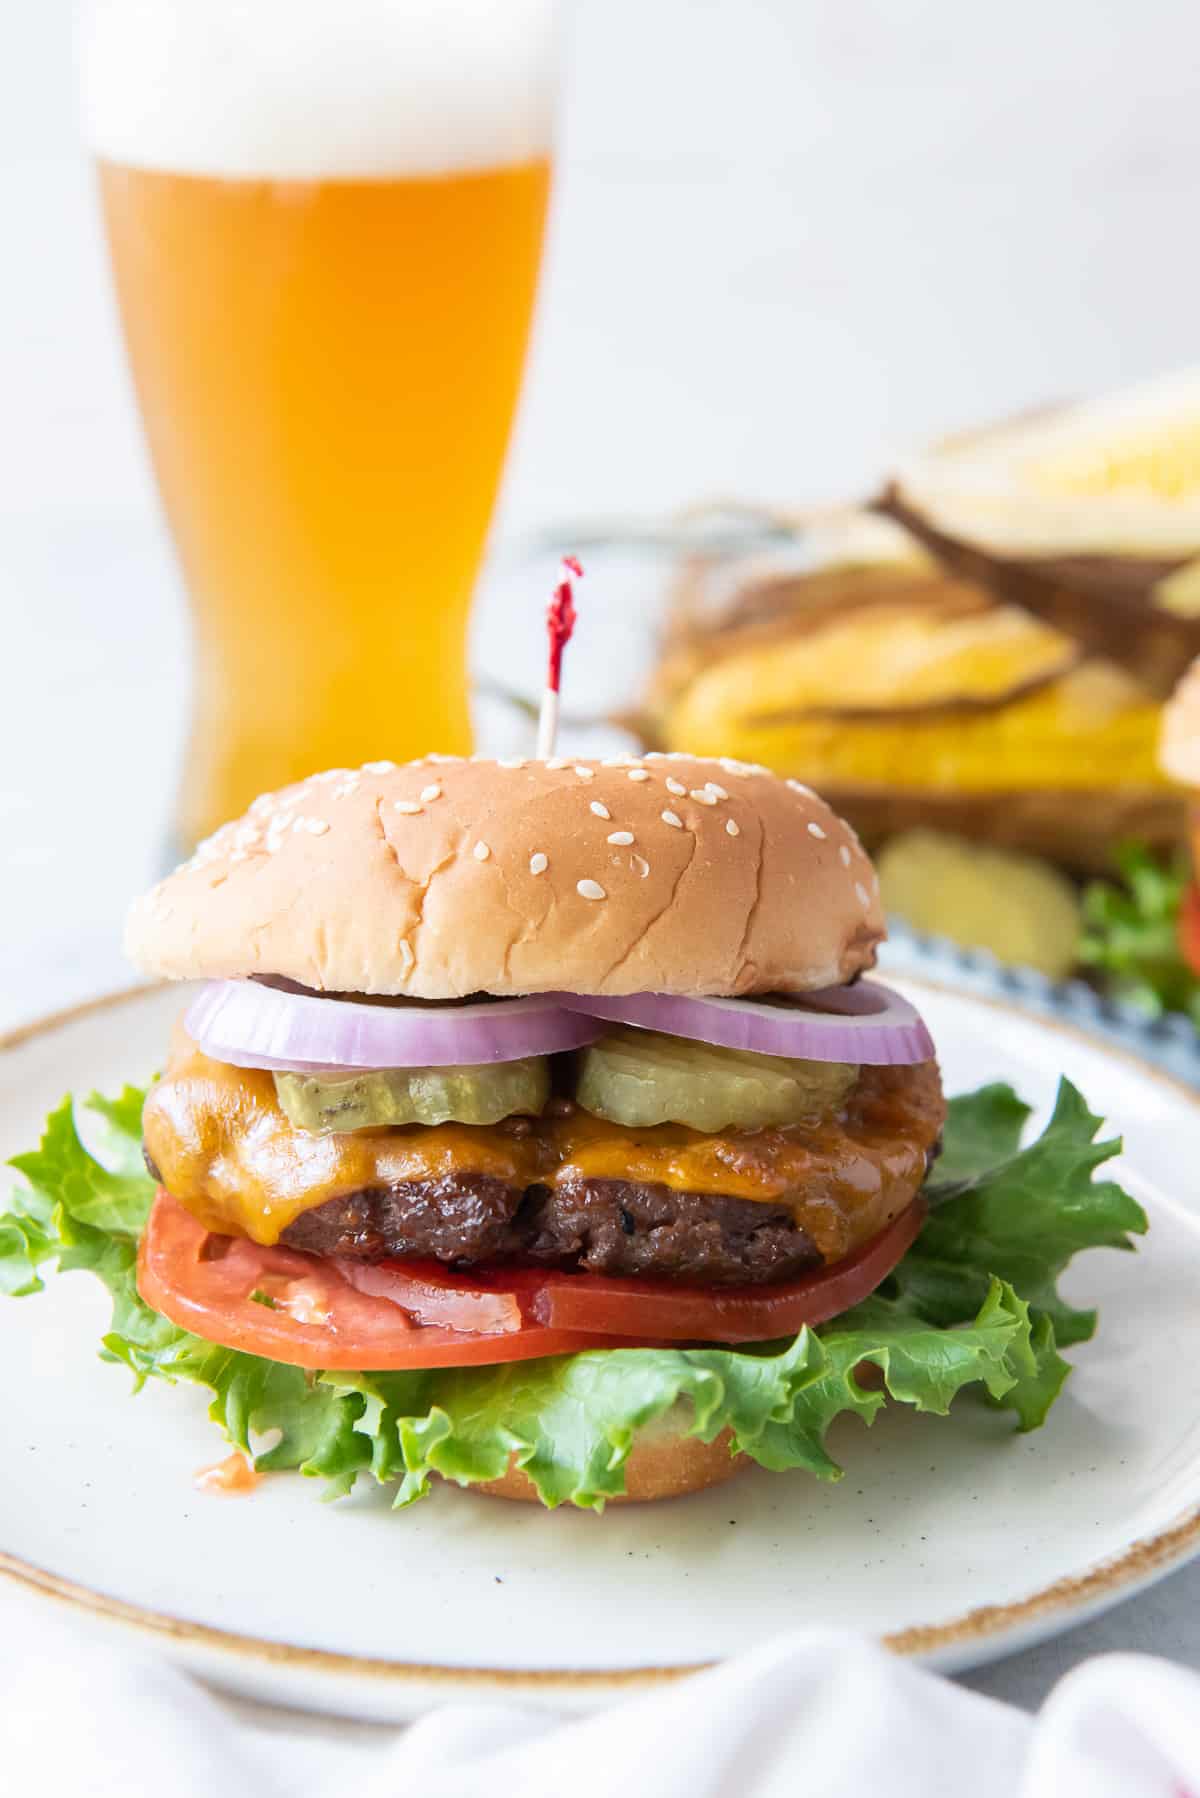 A beef burger with cheese on a plate with a beer in the background.